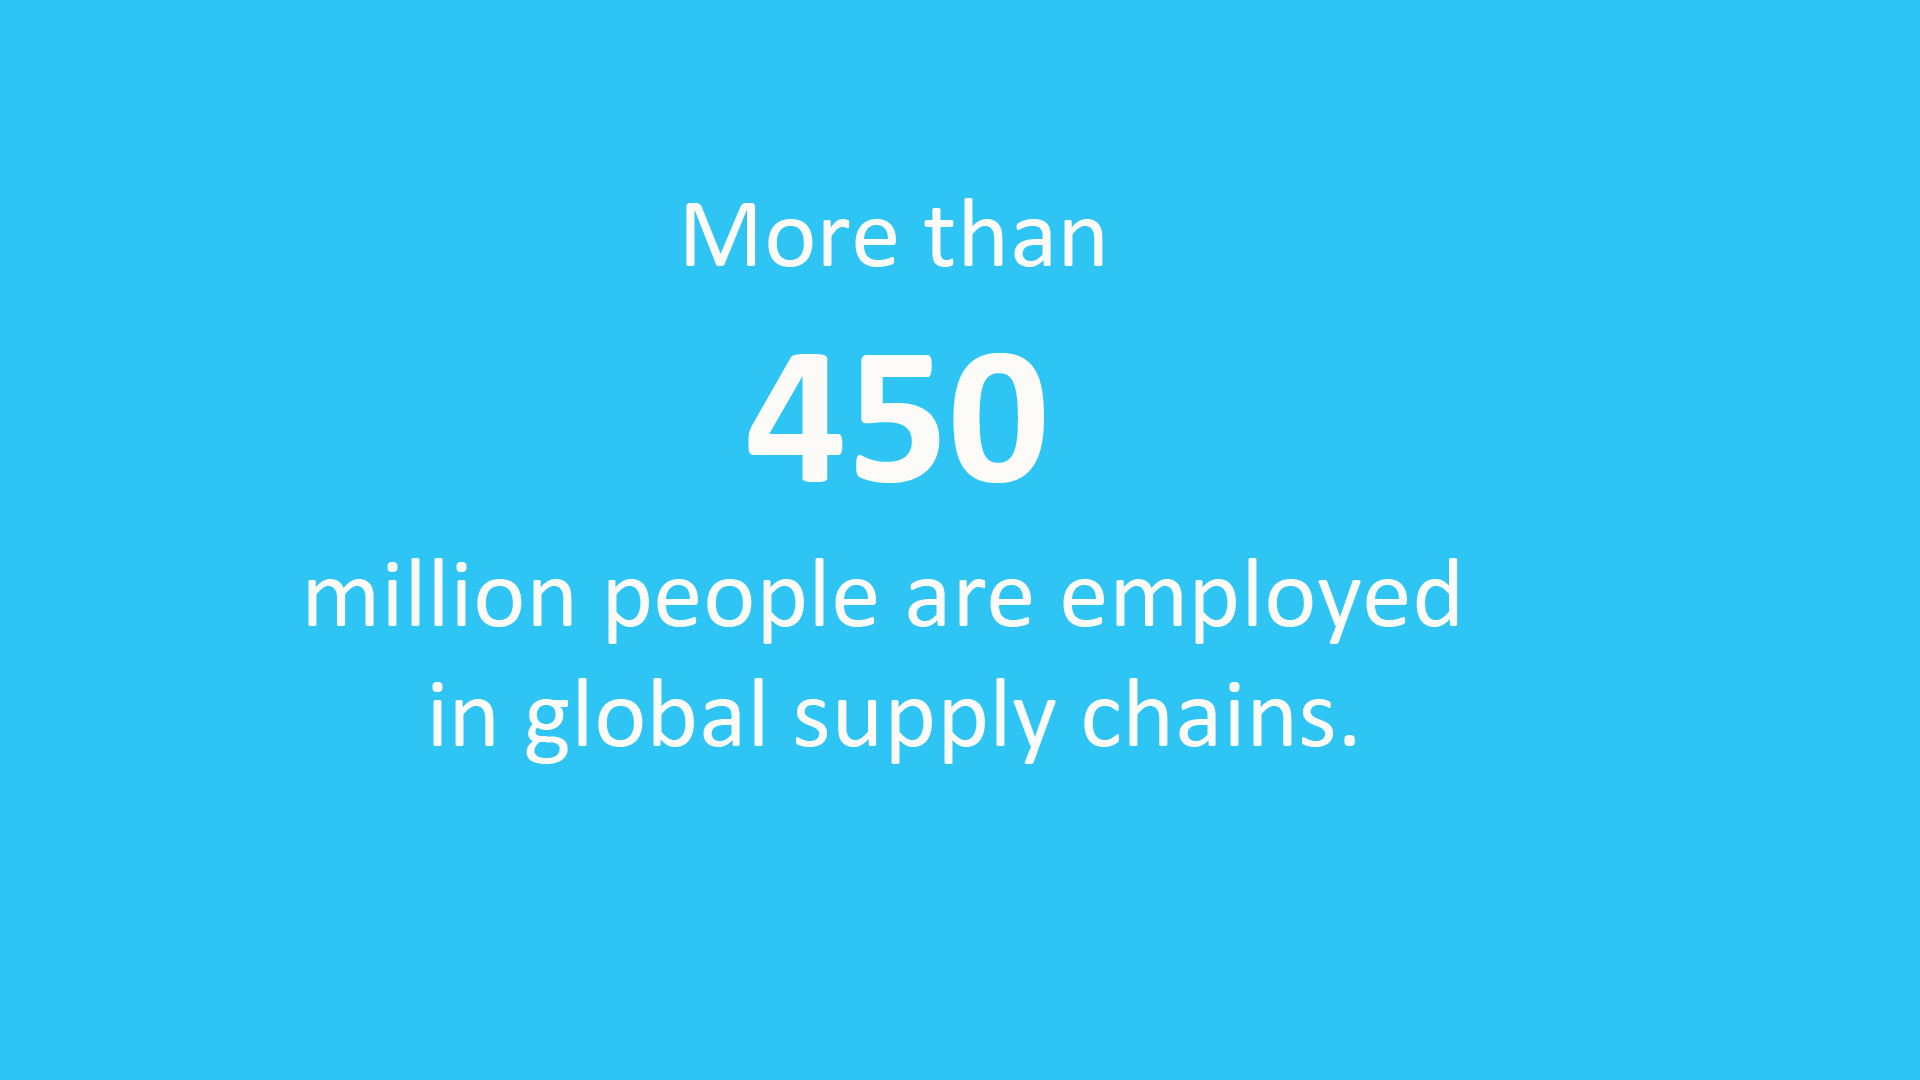 More than 450 million people are employed in global supply chains.